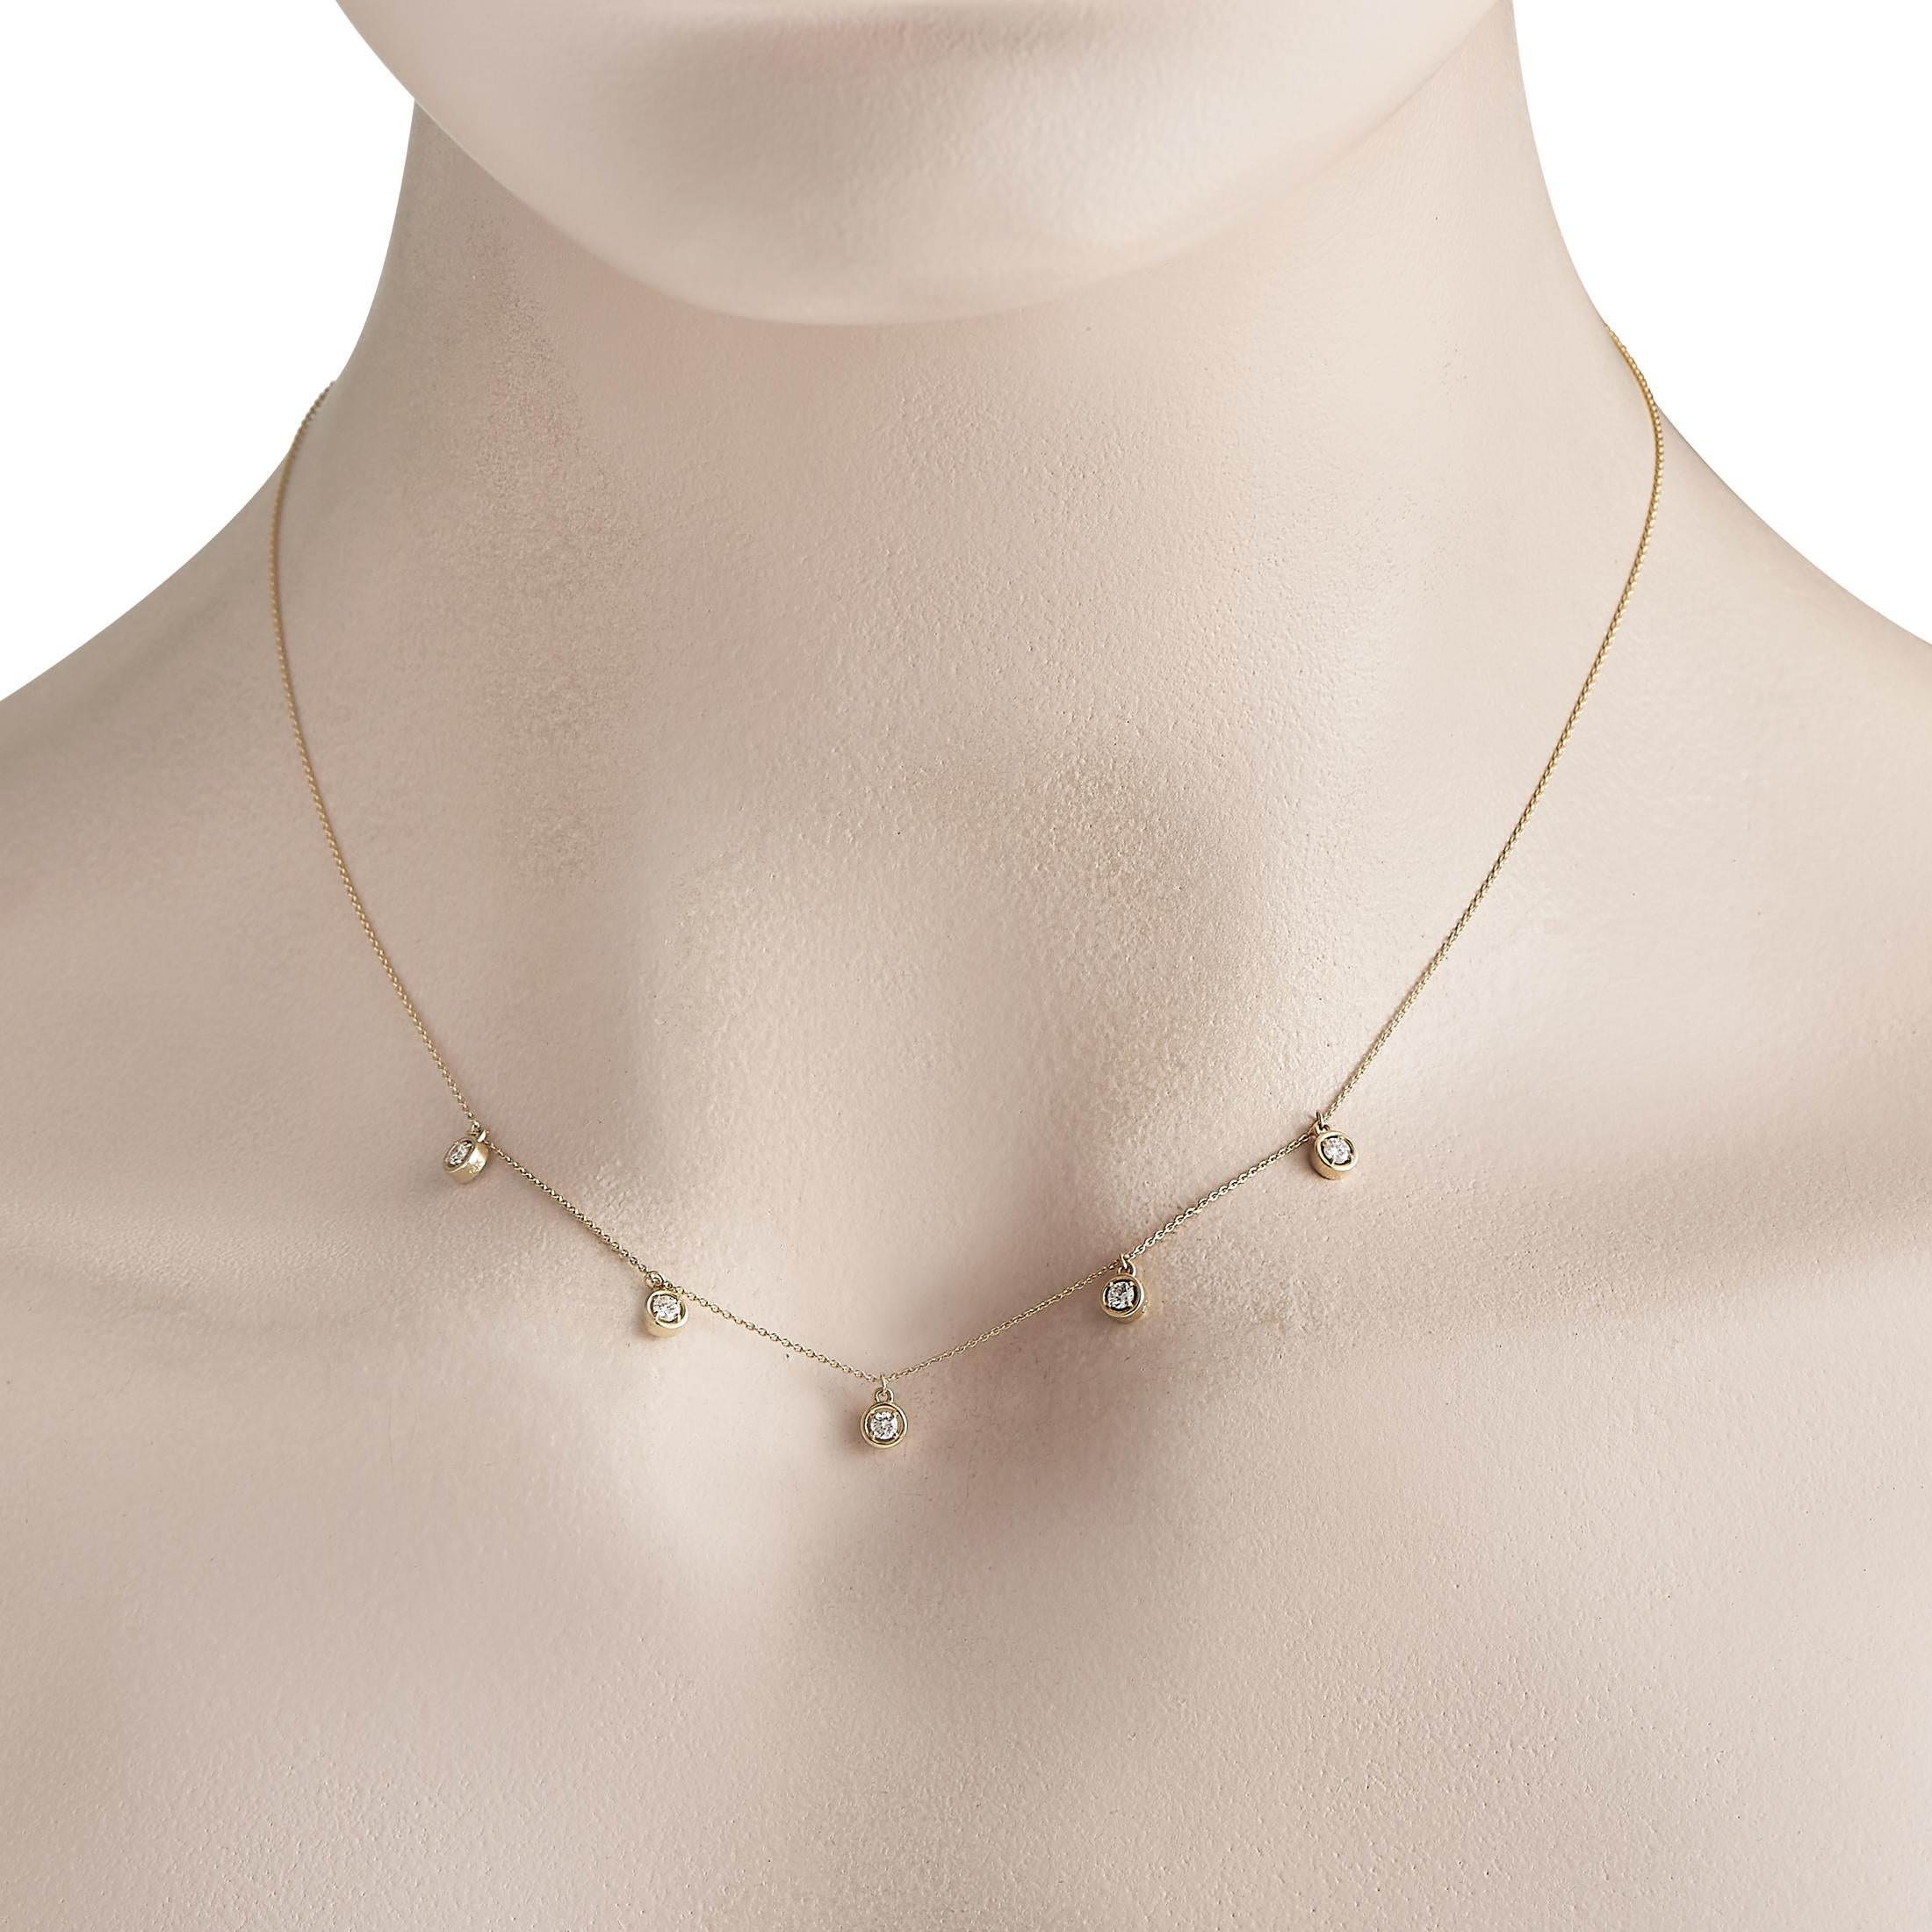 This diamond station necklace can give an instant lift to any outfit. Its minimalist profile and understated sparkle make it suitable for casual, work, evening, or formal wear. The necklace is designed with a 17-long chain and a secure lobster